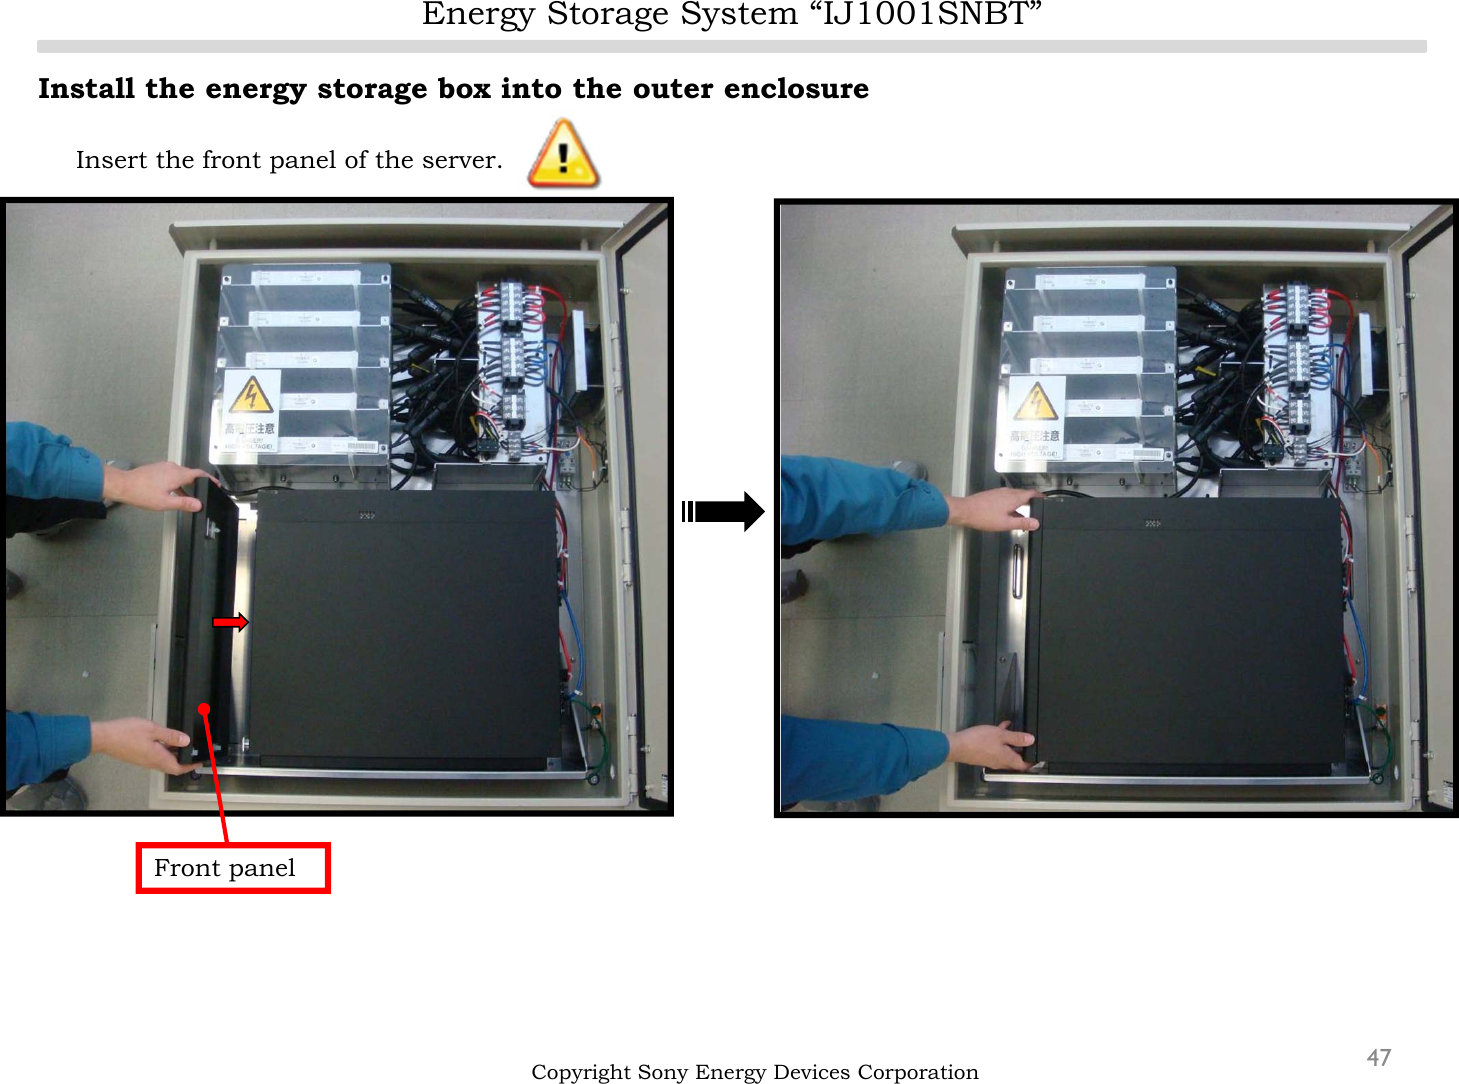 Energy Storage System “IJ1001SNBT”47Install the energy storage box into the outer enclosureInsert the front panel of the server.Copyright Sony Energy Devices CorporationFront panel